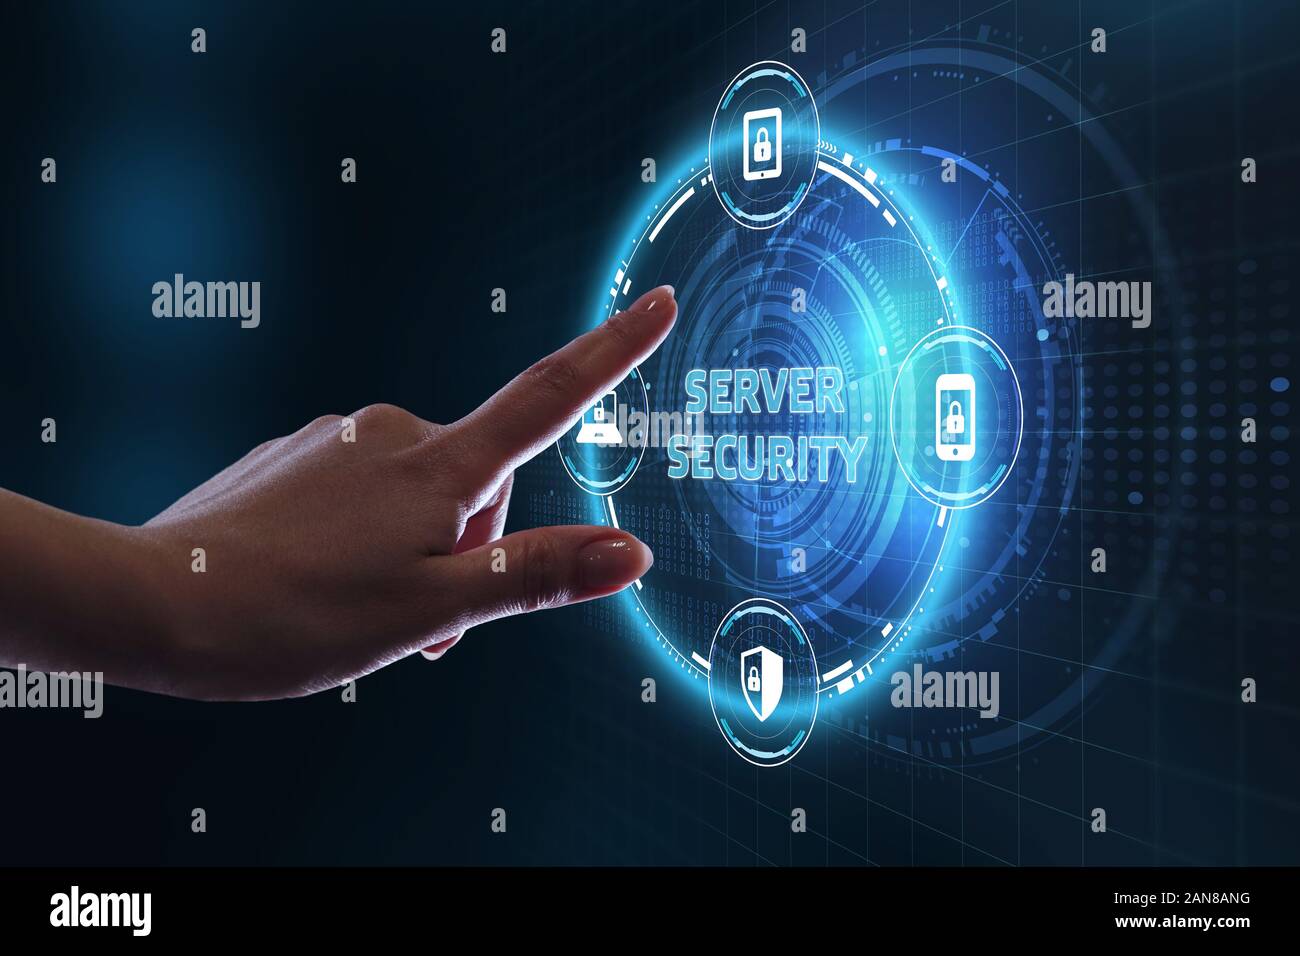 Business, technology, internet and networking concept. Young businessman select the icon Server security  on the virtual display. Stock Photo